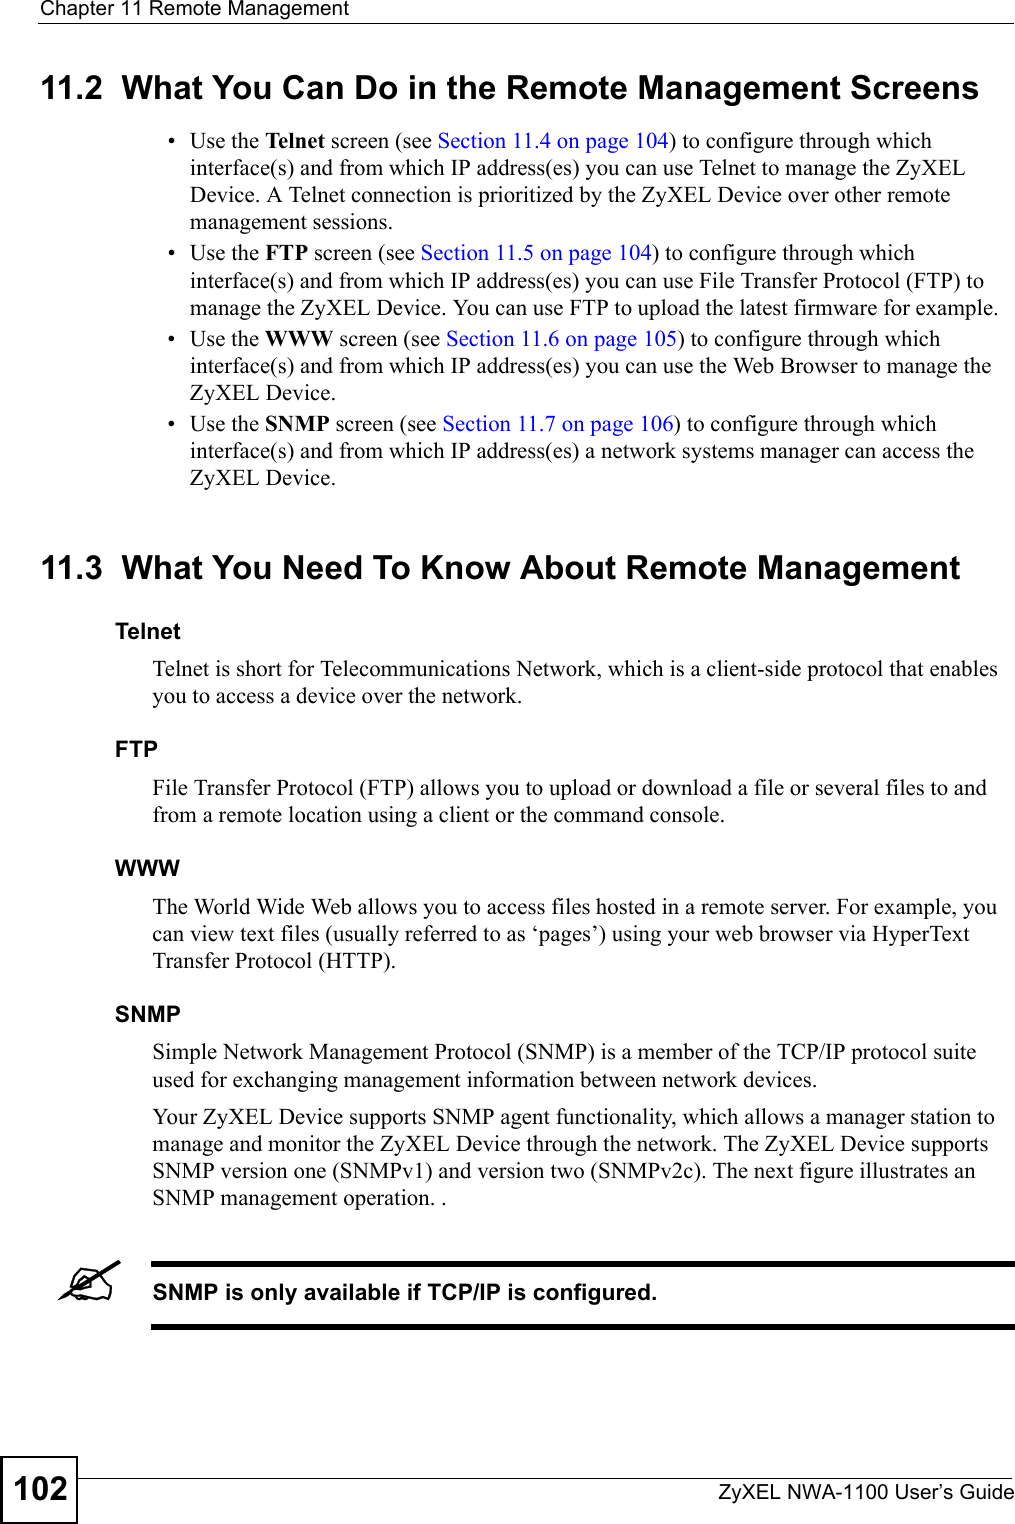 Chapter 11 Remote ManagementZyXEL NWA-1100 User’s Guide10211.2  What You Can Do in the Remote Management Screens•Use the Telnet screen (see Section 11.4 on page 104) to configure through which interface(s) and from which IP address(es) you can use Telnet to manage the ZyXEL Device. A Telnet connection is prioritized by the ZyXEL Device over other remote management sessions. • Use the FTP screen (see Section 11.5 on page 104) to configure through which interface(s) and from which IP address(es) you can use File Transfer Protocol (FTP) to manage the ZyXEL Device. You can use FTP to upload the latest firmware for example.• Use the WWW screen (see Section 11.6 on page 105) to configure through which interface(s) and from which IP address(es) you can use the Web Browser to manage the ZyXEL Device. • Use the SNMP screen (see Section 11.7 on page 106) to configure through which interface(s) and from which IP address(es) a network systems manager can access the ZyXEL Device. 11.3  What You Need To Know About Remote ManagementTelnet Telnet is short for Telecommunications Network, which is a client-side protocol that enables you to access a device over the network. FTPFile Transfer Protocol (FTP) allows you to upload or download a file or several files to and from a remote location using a client or the command console. WWWThe World Wide Web allows you to access files hosted in a remote server. For example, you can view text files (usually referred to as ‘pages’) using your web browser via HyperText Transfer Protocol (HTTP).SNMPSimple Network Management Protocol (SNMP) is a member of the TCP/IP protocol suite used for exchanging management information between network devices. Your ZyXEL Device supports SNMP agent functionality, which allows a manager station to manage and monitor the ZyXEL Device through the network. The ZyXEL Device supports SNMP version one (SNMPv1) and version two (SNMPv2c). The next figure illustrates an SNMP management operation. .&quot;SNMP is only available if TCP/IP is configured.